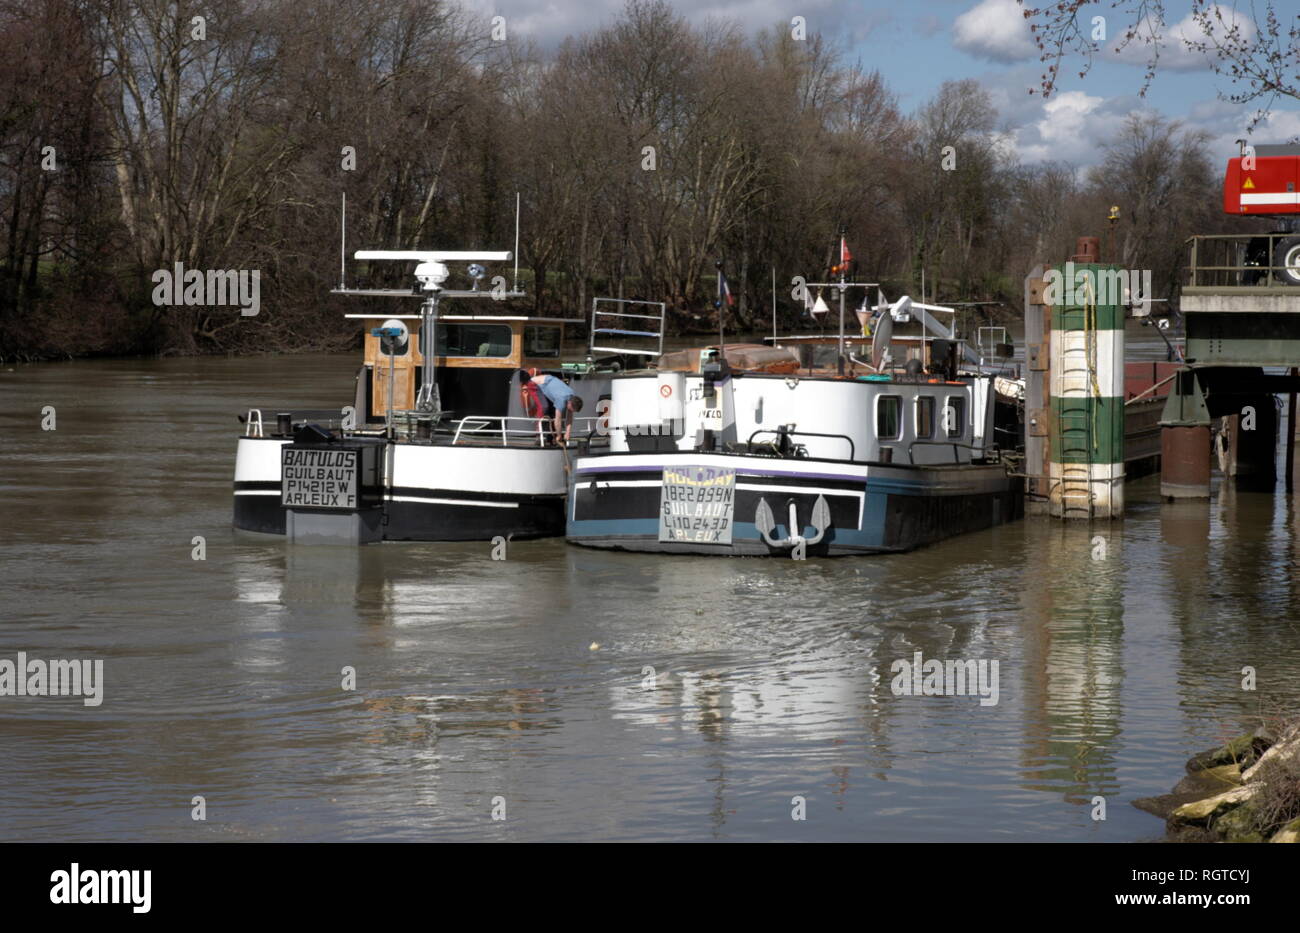 AJAXNETPHOTO.  BOUGIVAL,FRANCE. - SPRINGTIME ON THE BANKS OF THE RIVER SEINE - WORKING BARGES MOORED AT AN AGGREGATES DOCK - SCENES ALONG THE BANKS OF THE RIVER HEREABOUTS PAINTED BY 19TH CENTURY IMPRESSIONIST ARTISTS ALFRED SISLEY, CAMILLE PISSARRO, VLAMINCK, MONET AND OTHERS. PHOTO:JONATHAN EASTLAND/AJAX REF:R60204 226 Stock Photo